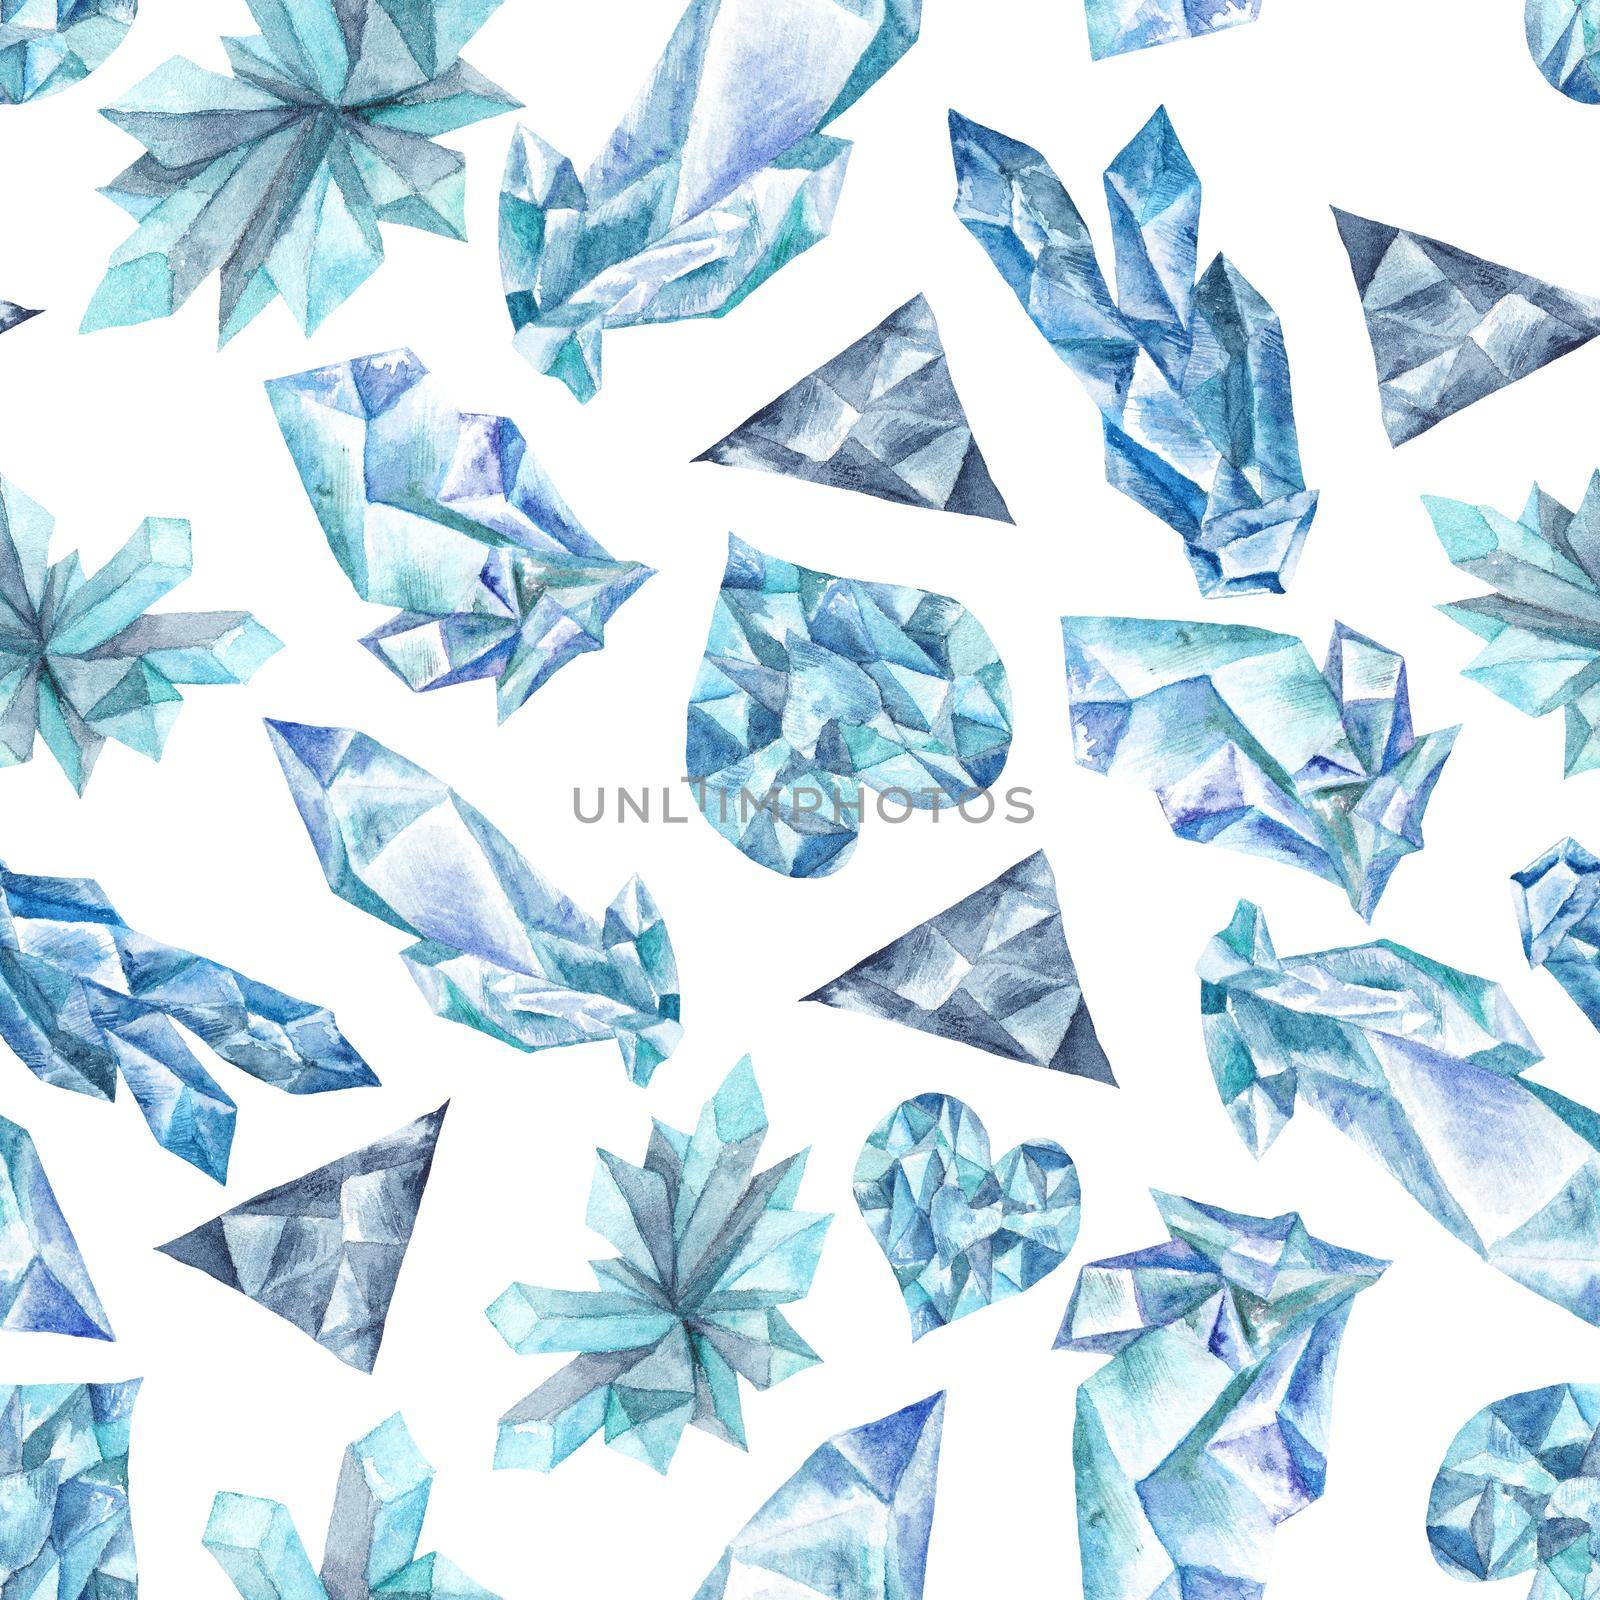 Watercolor Pattern with blue gems on white background by kisika